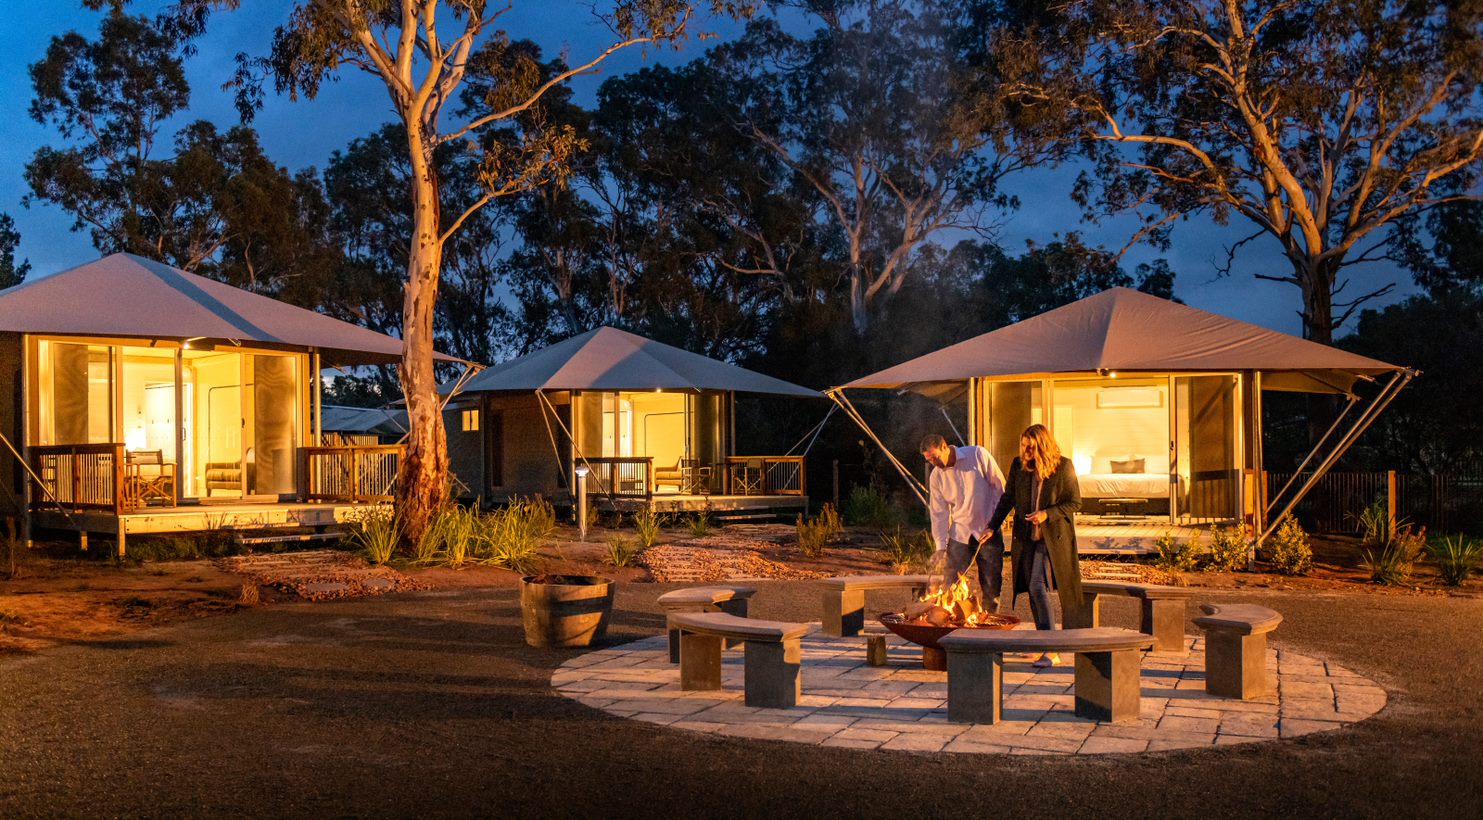 South australia best holiday park staycations barossa valley glamping satc